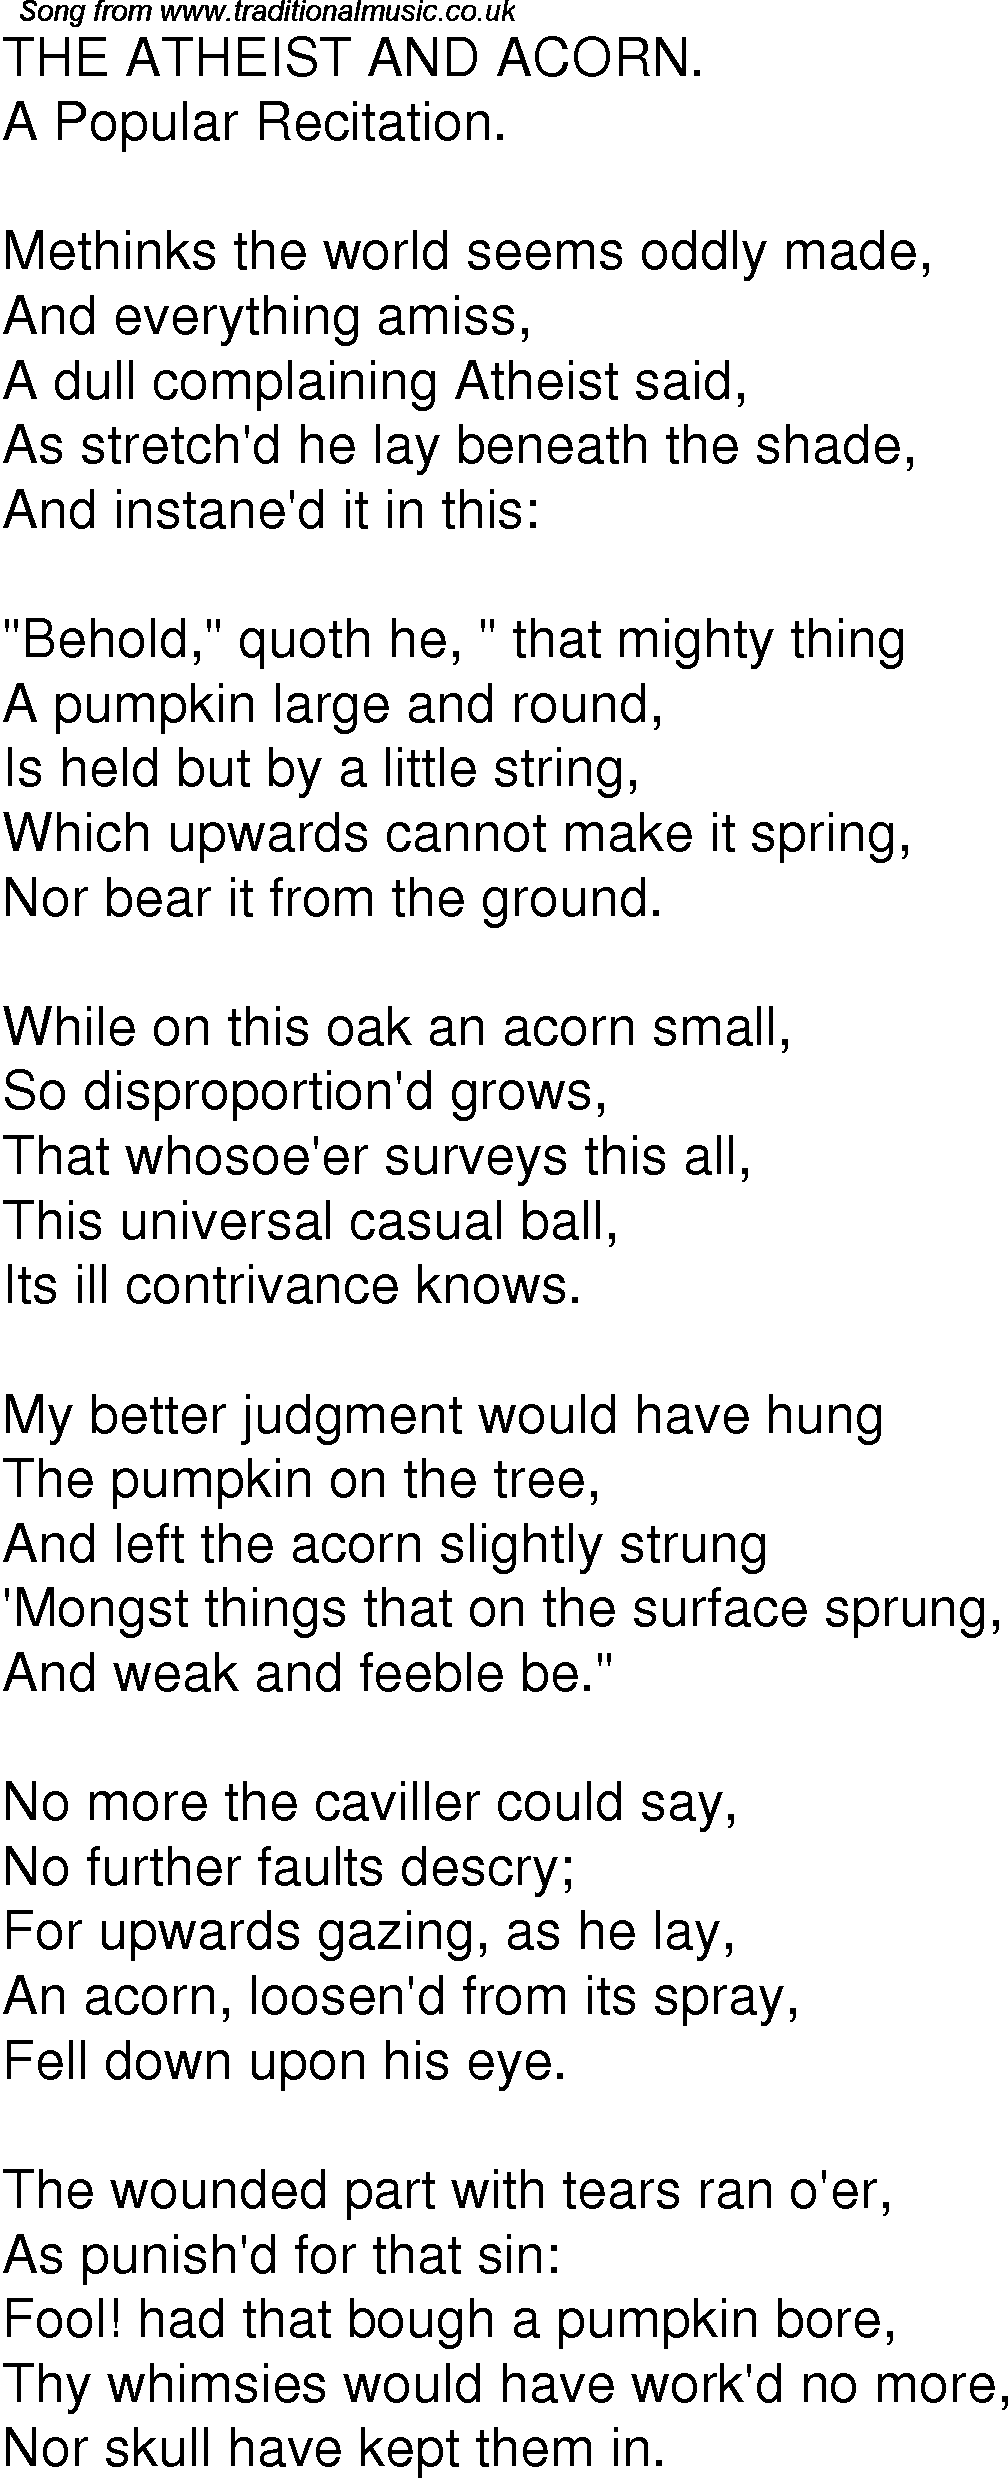 Old Time Song Lyrics for 03 The Atheist And Acorn